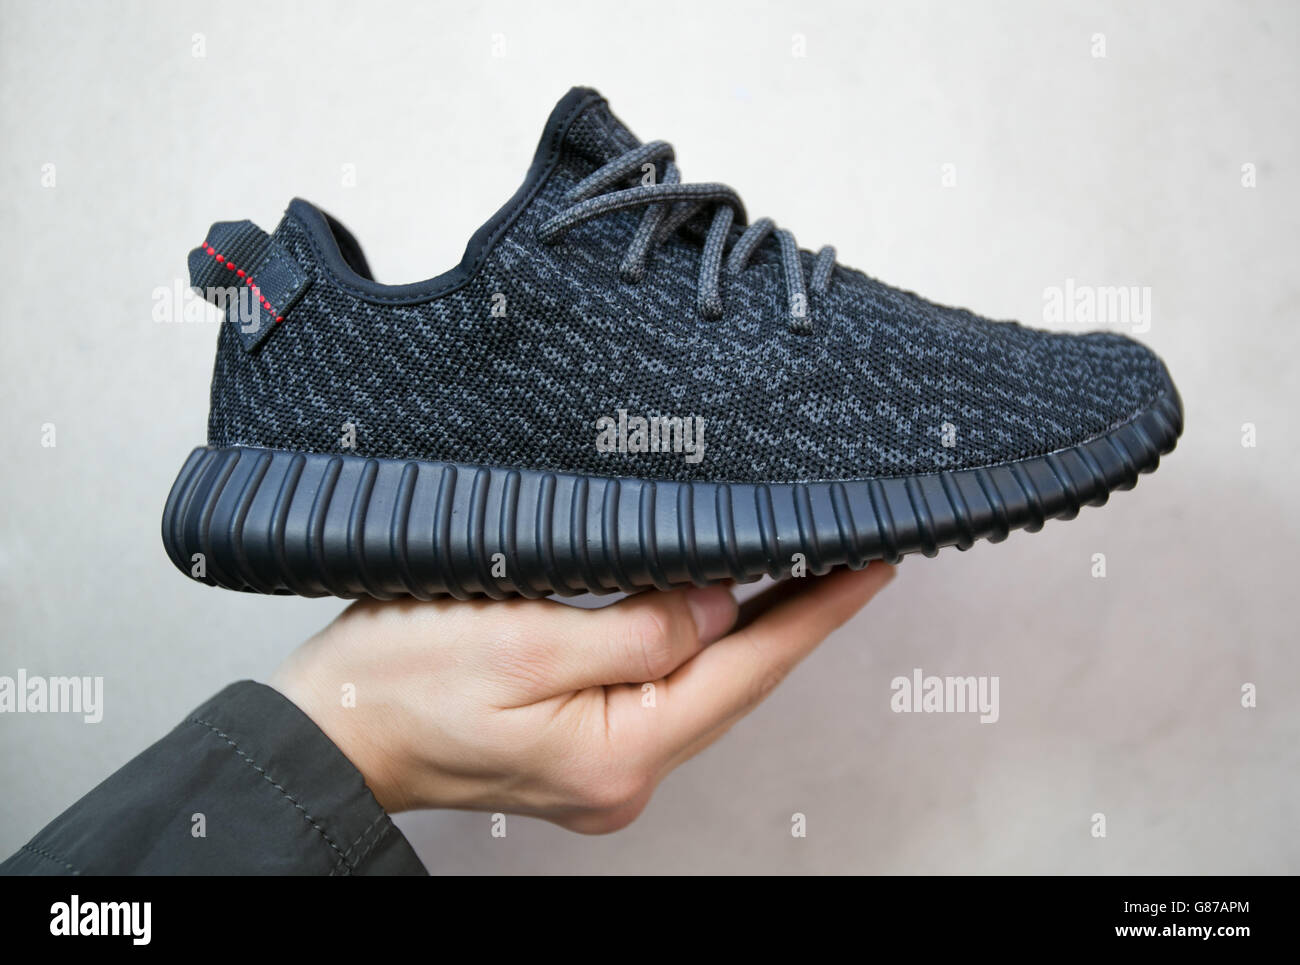 adidas yeezy boost 350 trainers